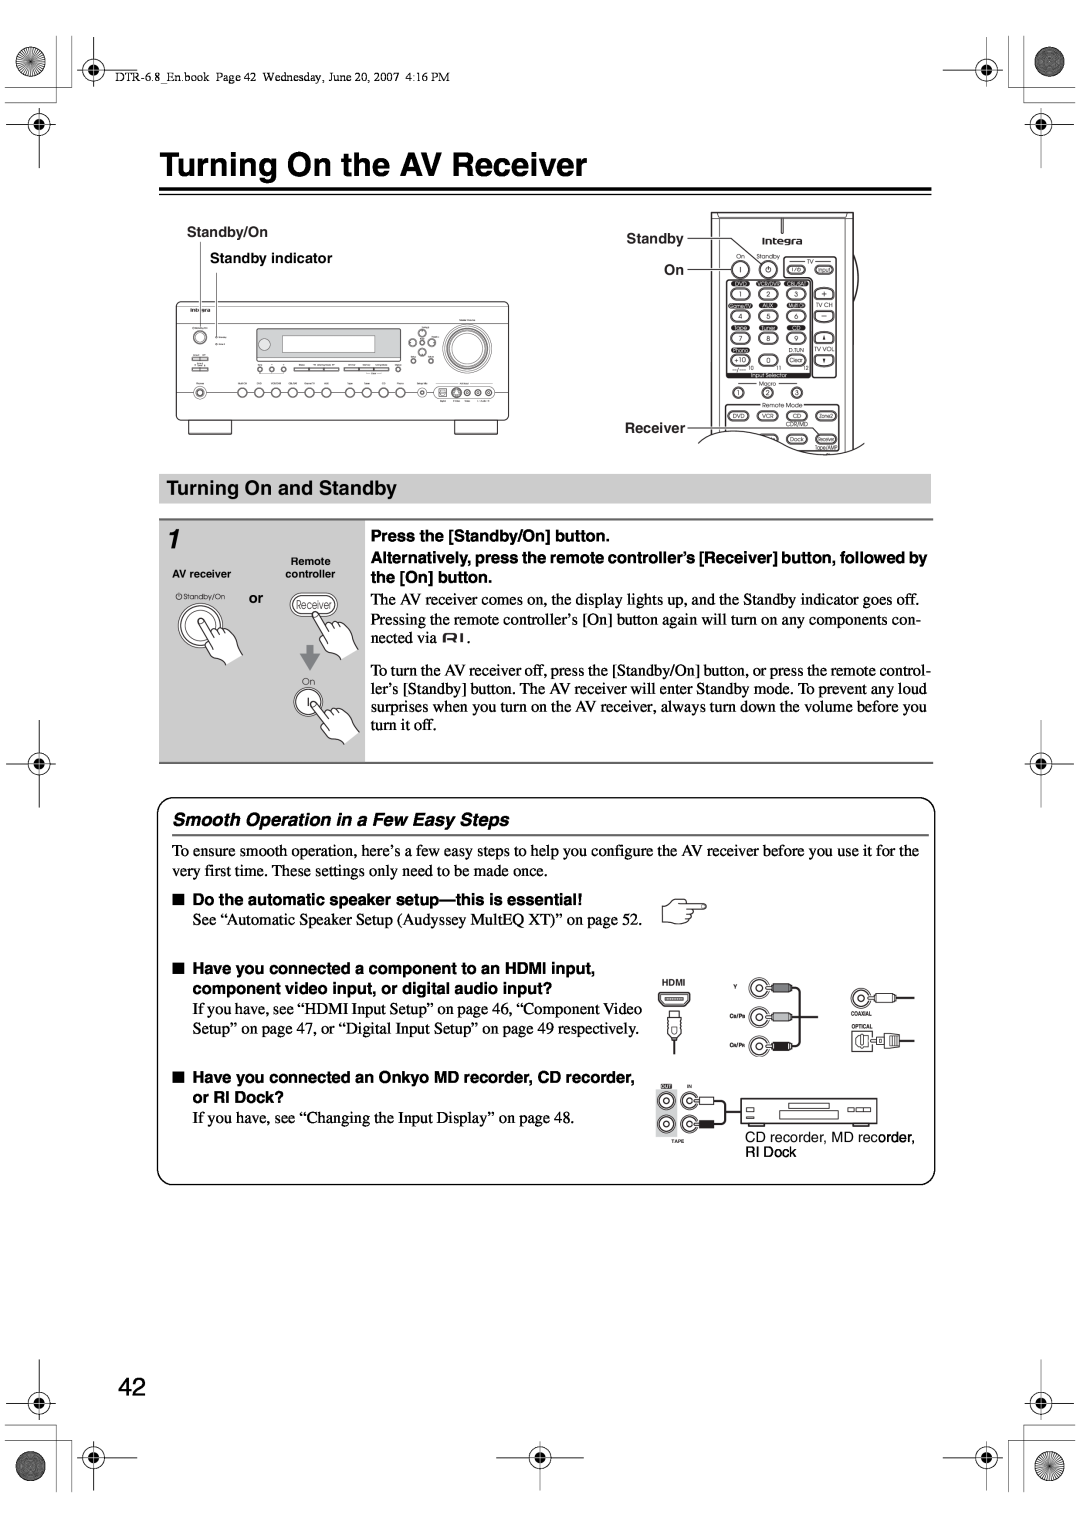 Integra DTR-6.8 instruction manual Turning On the AV Receiver, Turning On and Standby, Smooth Operation in a Few Easy Steps 